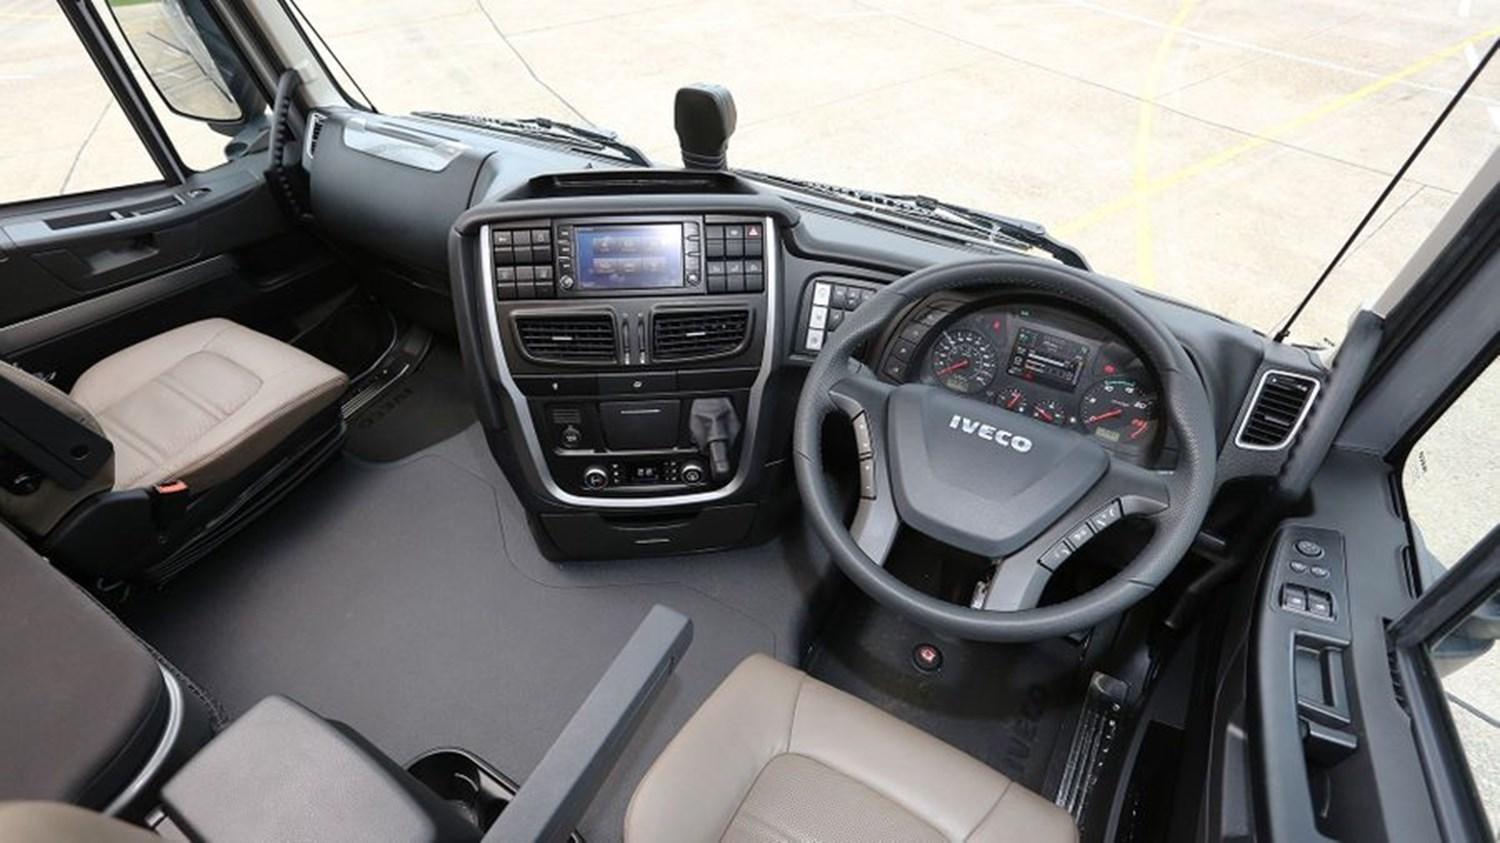 IVECO Stralis Interior, Steering wheel and dashboard